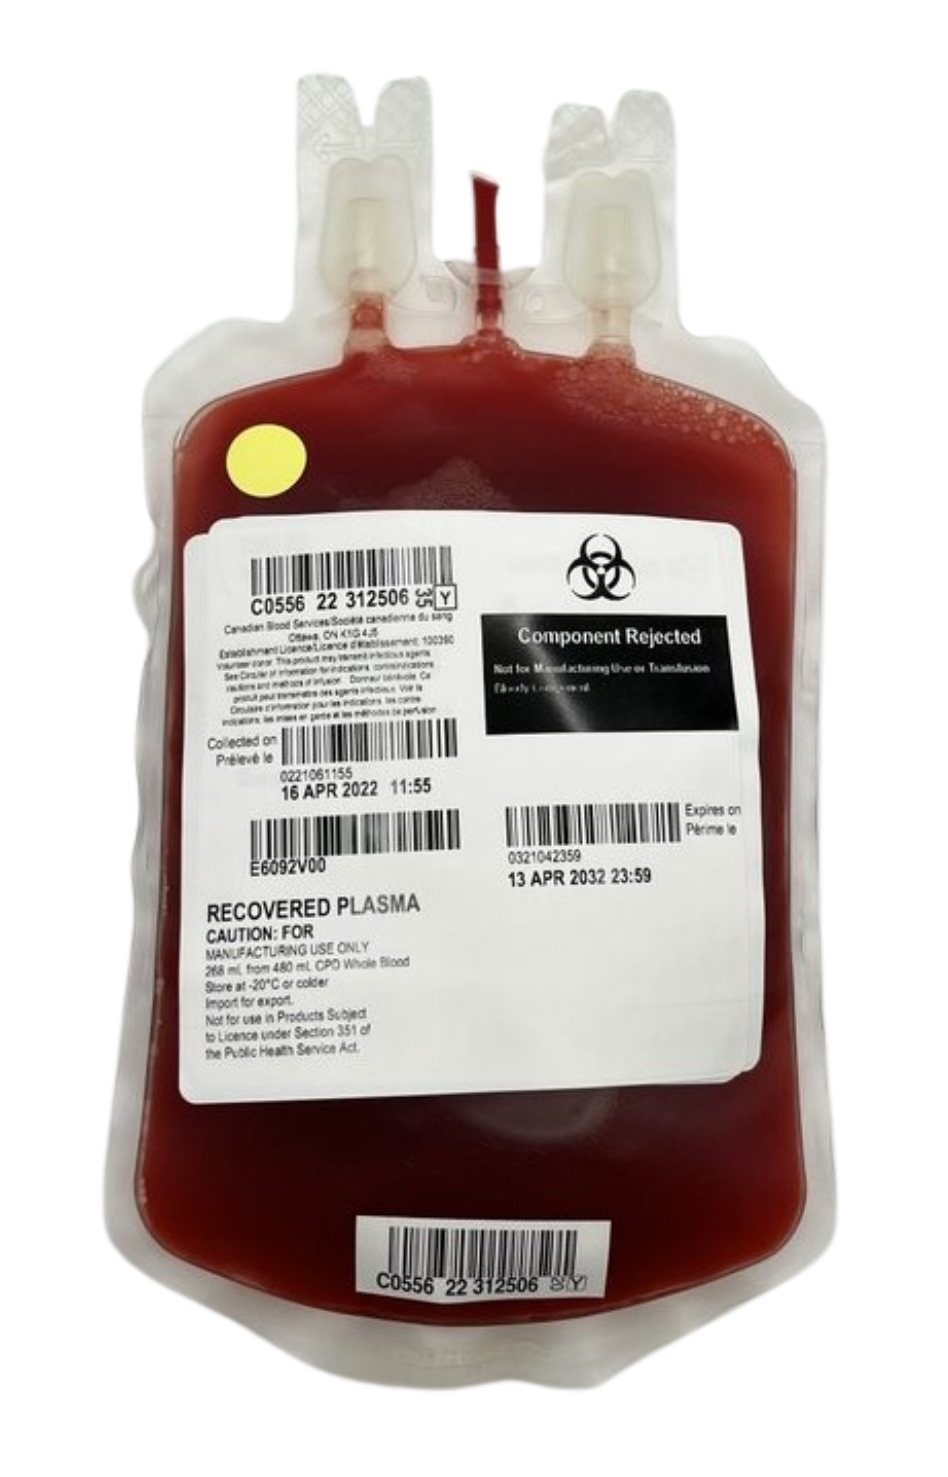 A unit of plasma viewed from the front that is unusually dark red in colour due to RBC contamination. 